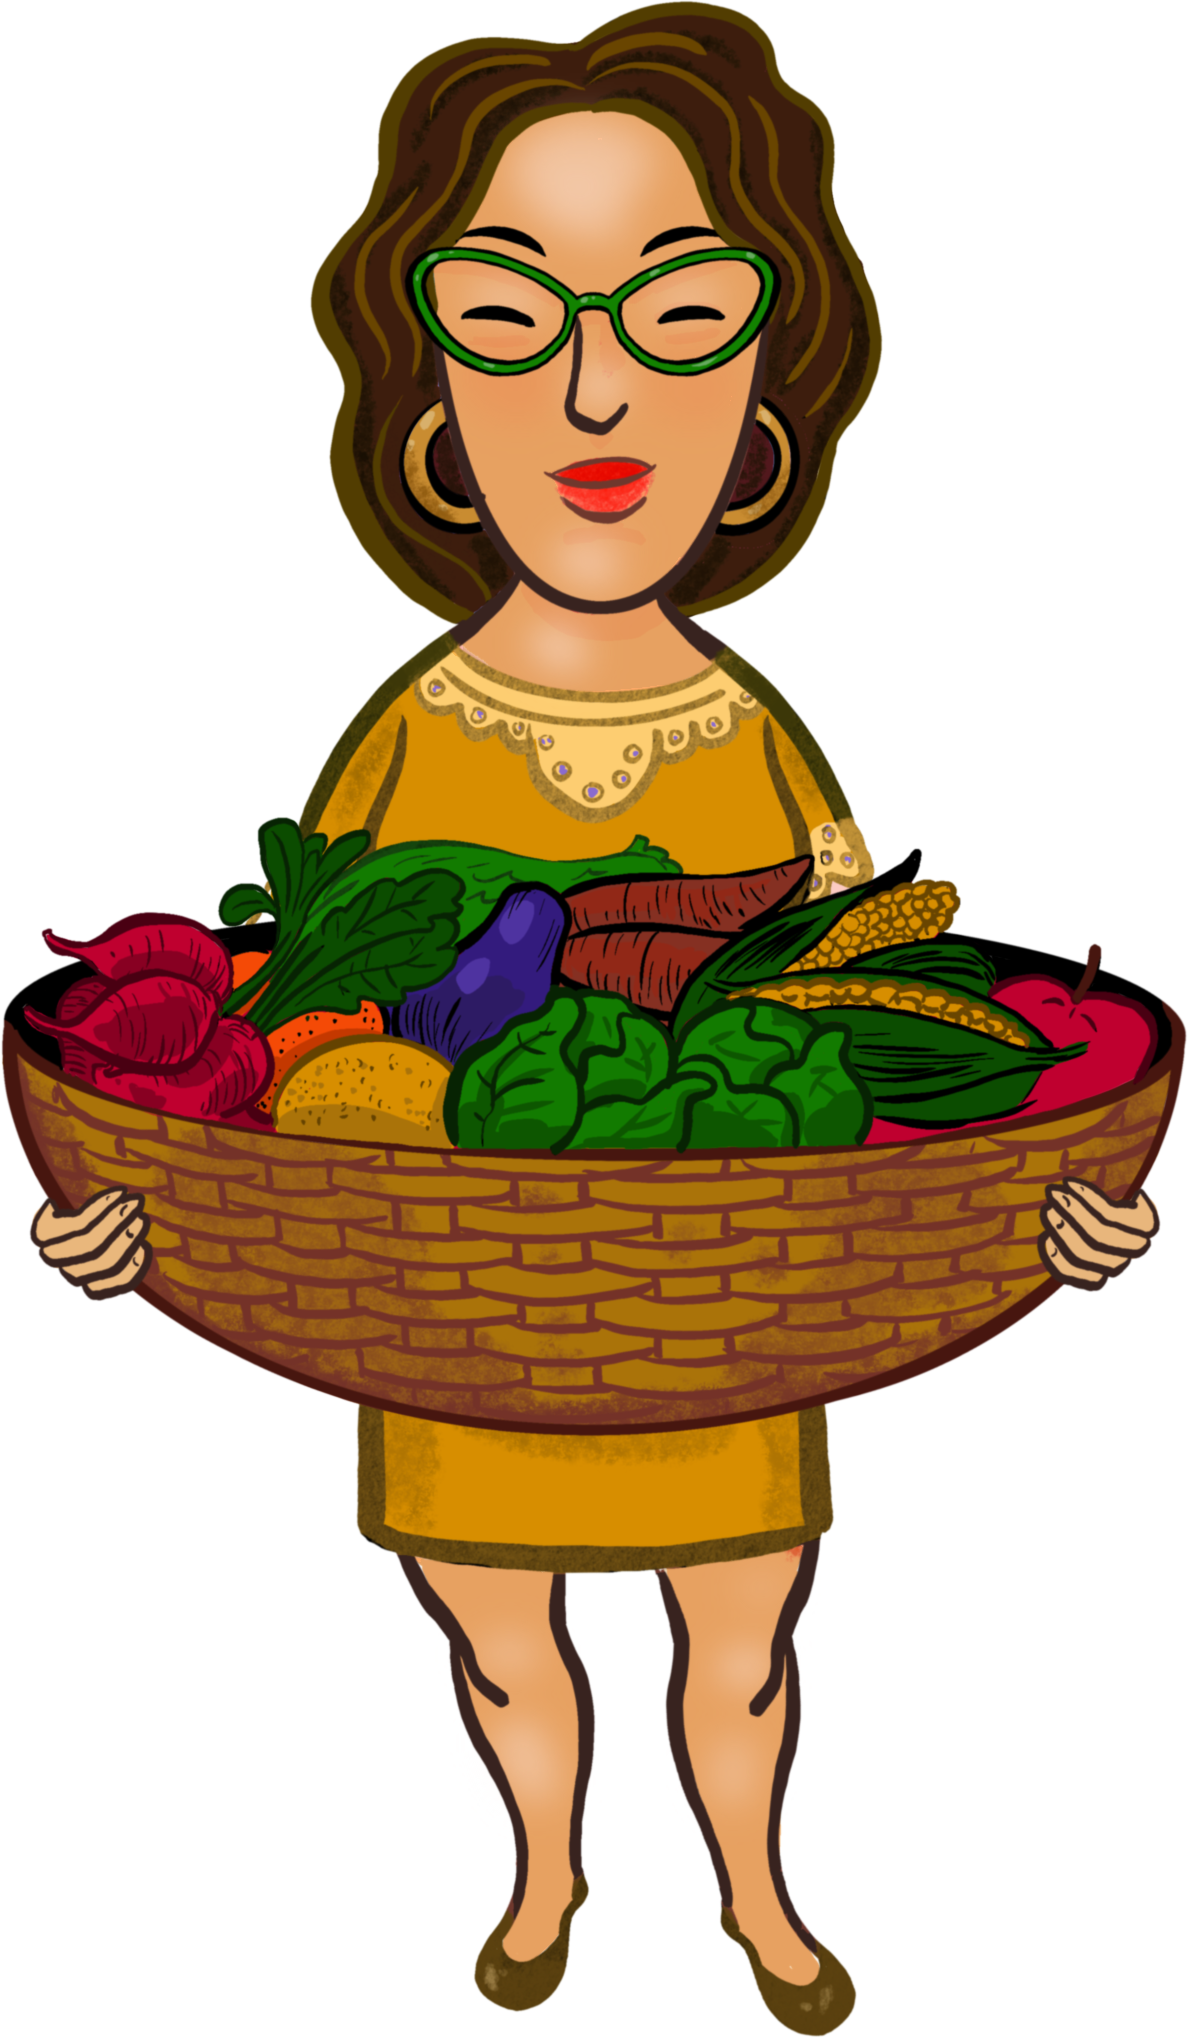 Polly (character) with a basket of produce